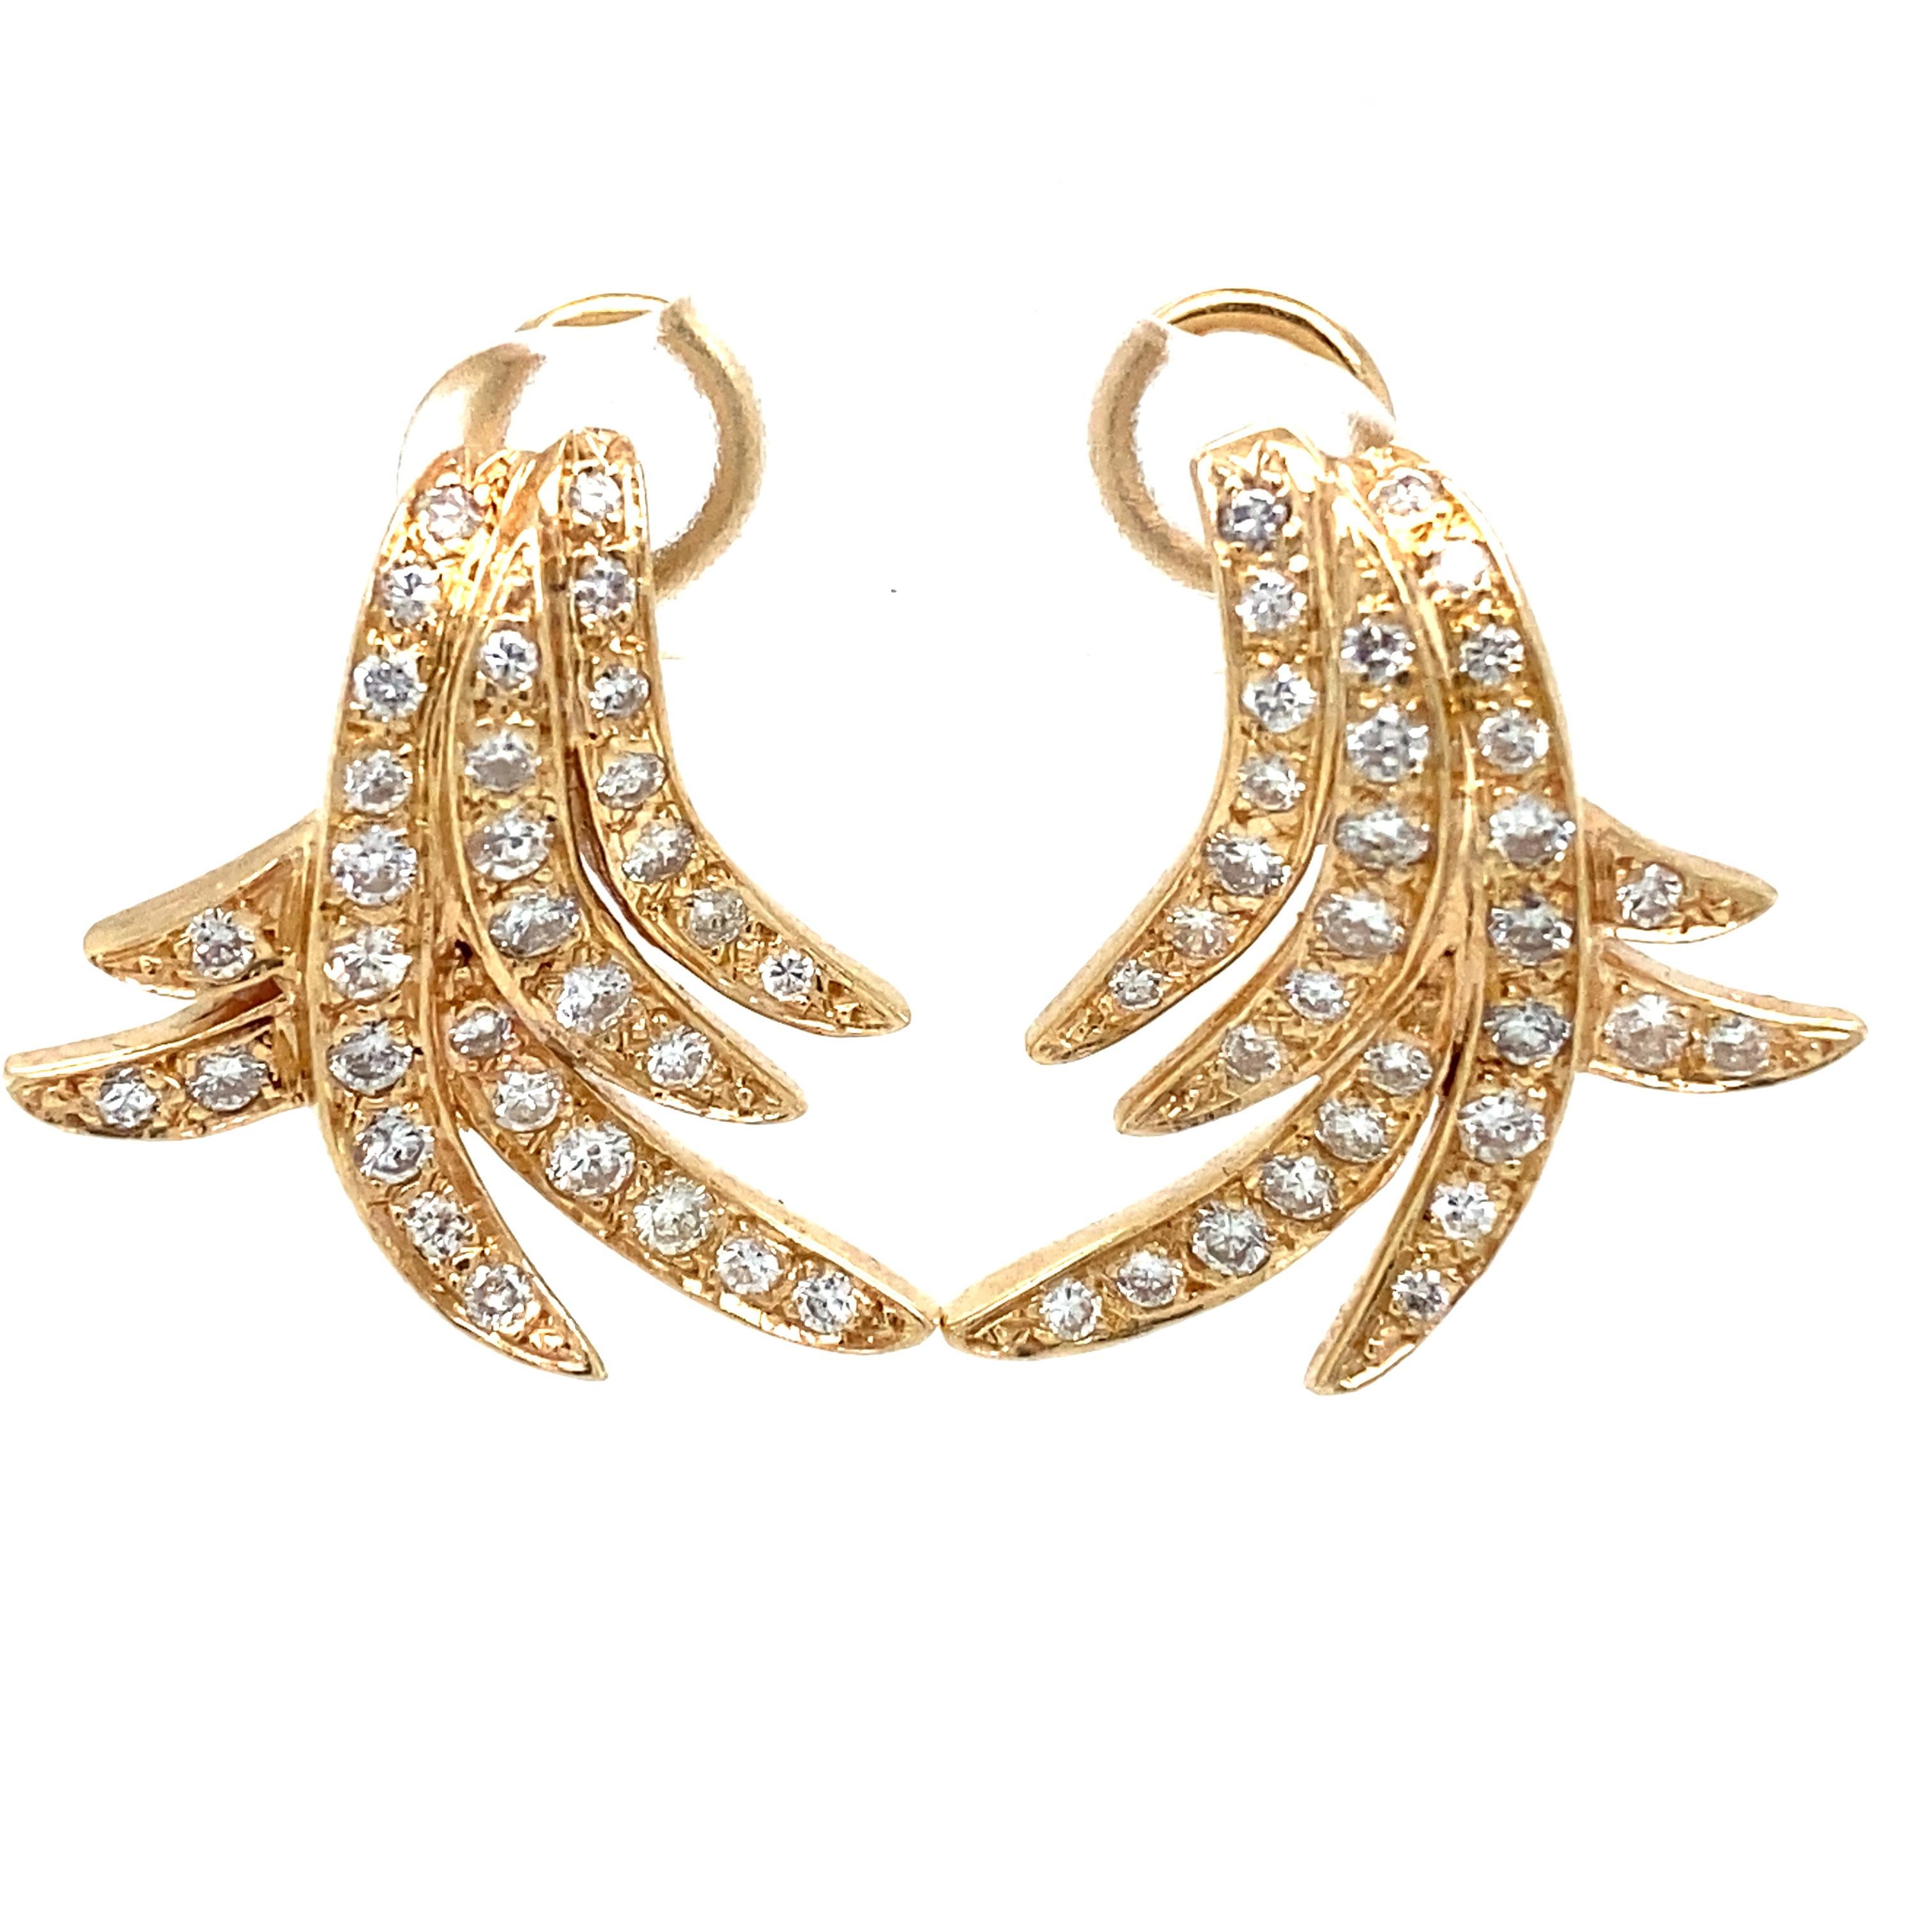 Modern Enrique Pascual Diamond Feather Earrings in 14 Karat Yellow Gold For Sale